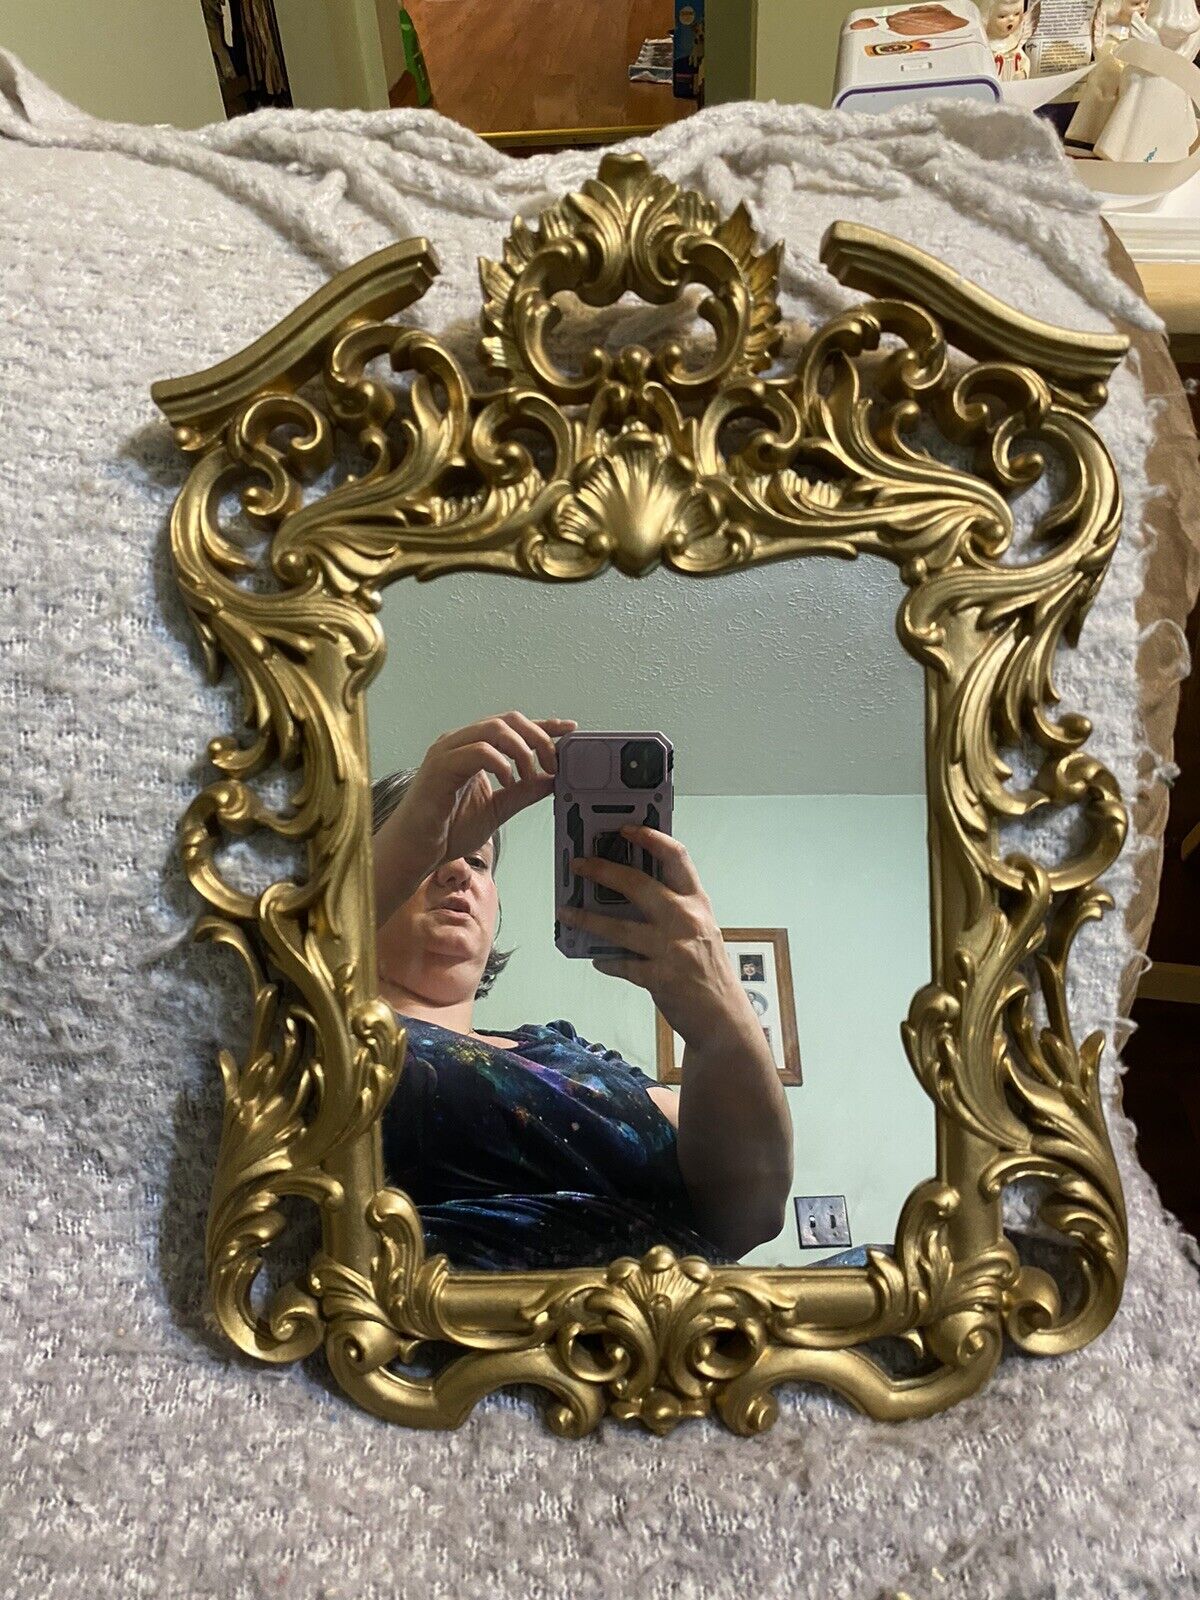 Vintage Ornate Oval Gold Plastic Picture / Mirror Frame 8”x10” 1973